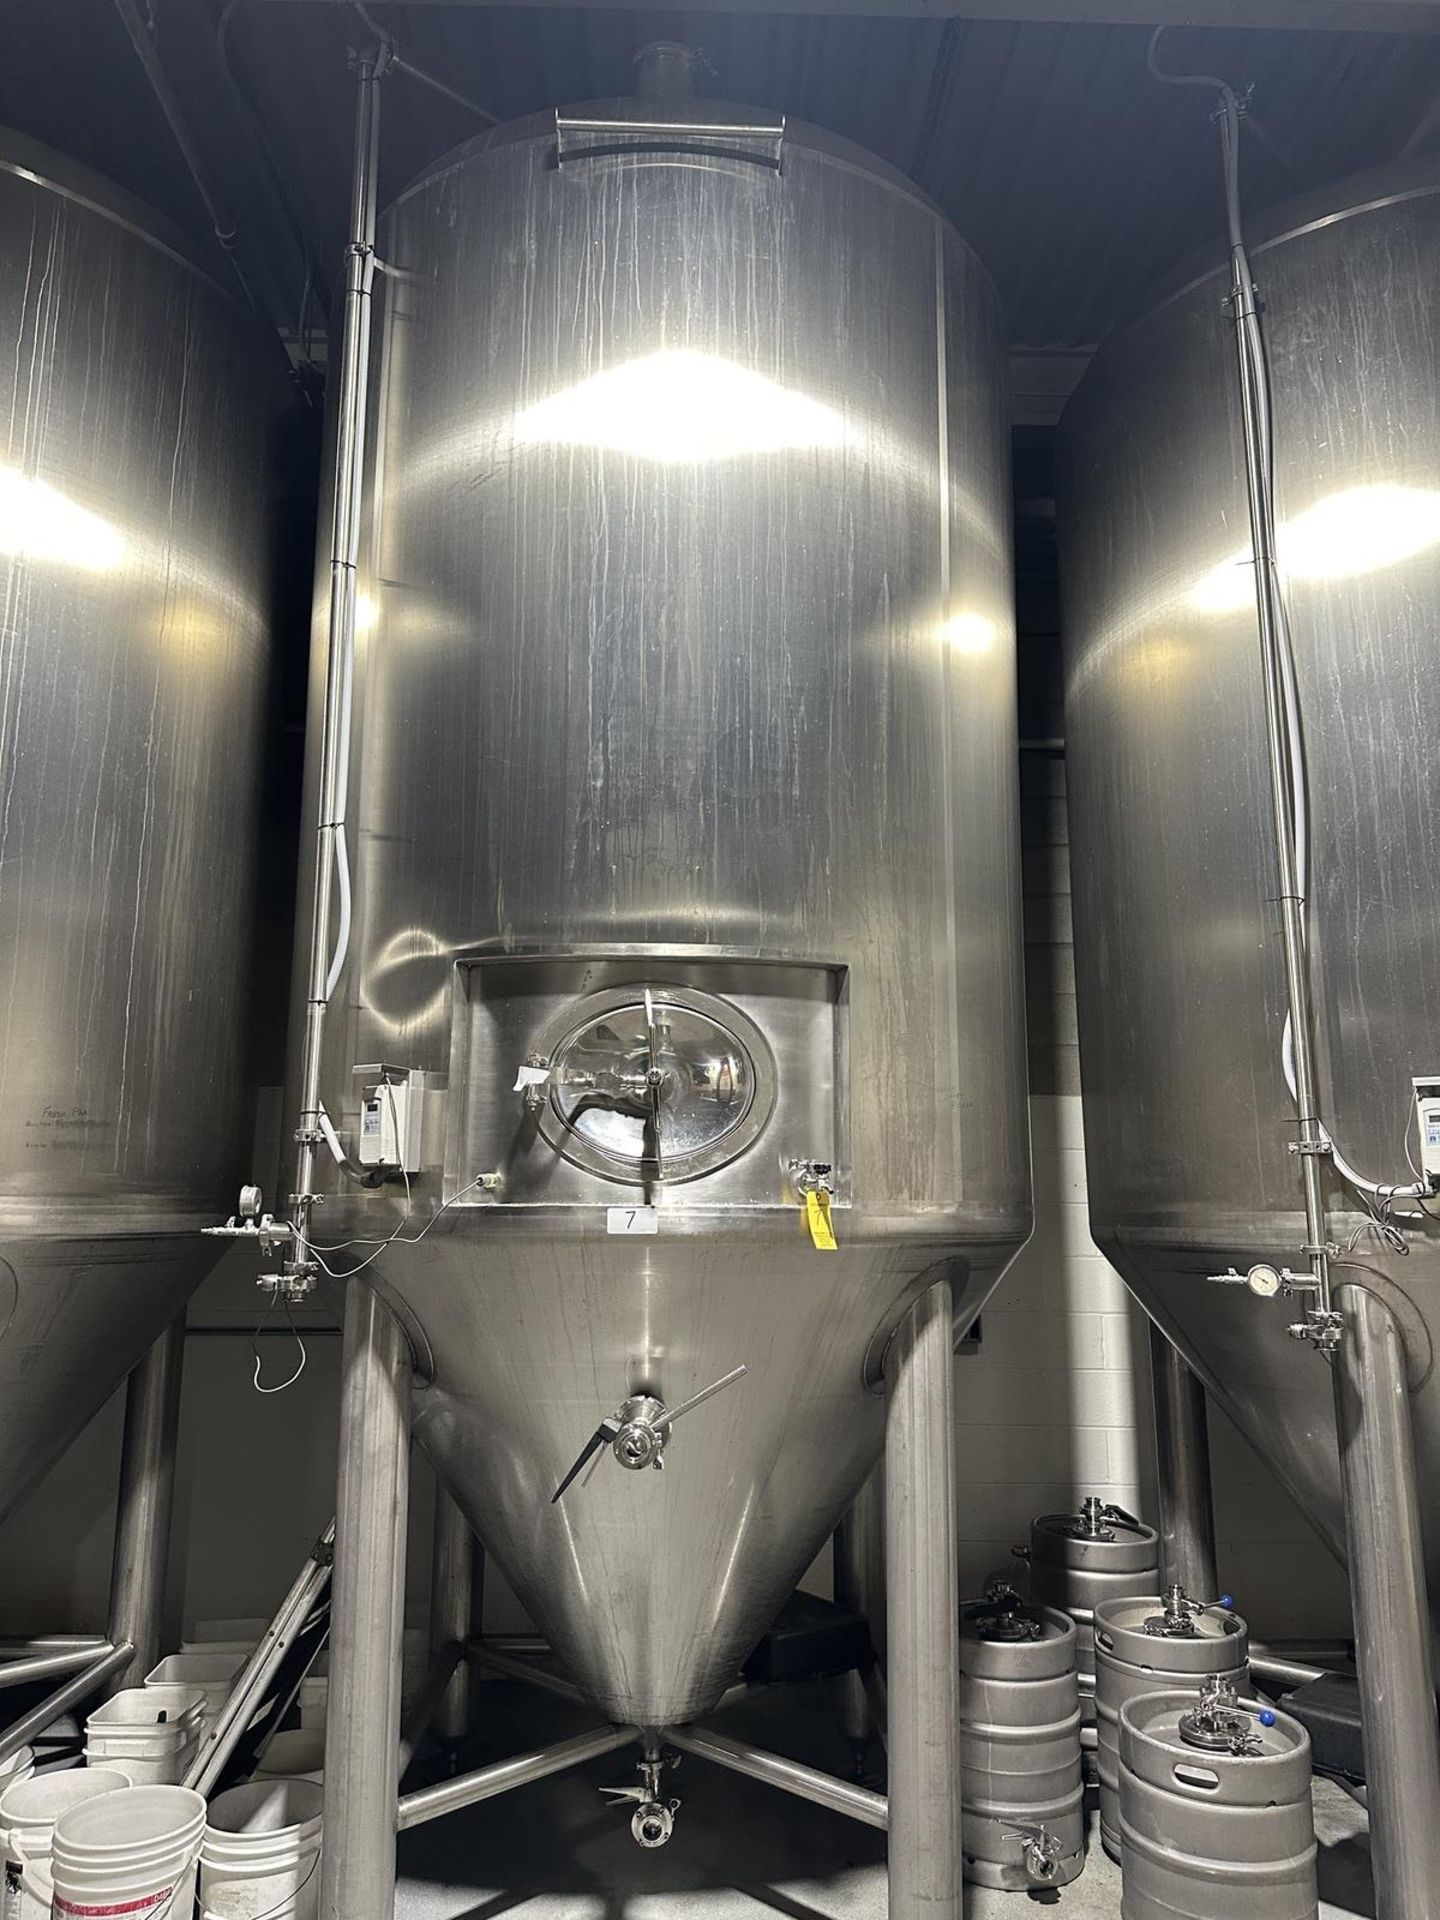 Criveller 60 BBL Stainless Steel Fermenter, Glycol Jacketed, Nema 4X Electronic Tem | Rig Fee $350 - Image 2 of 6